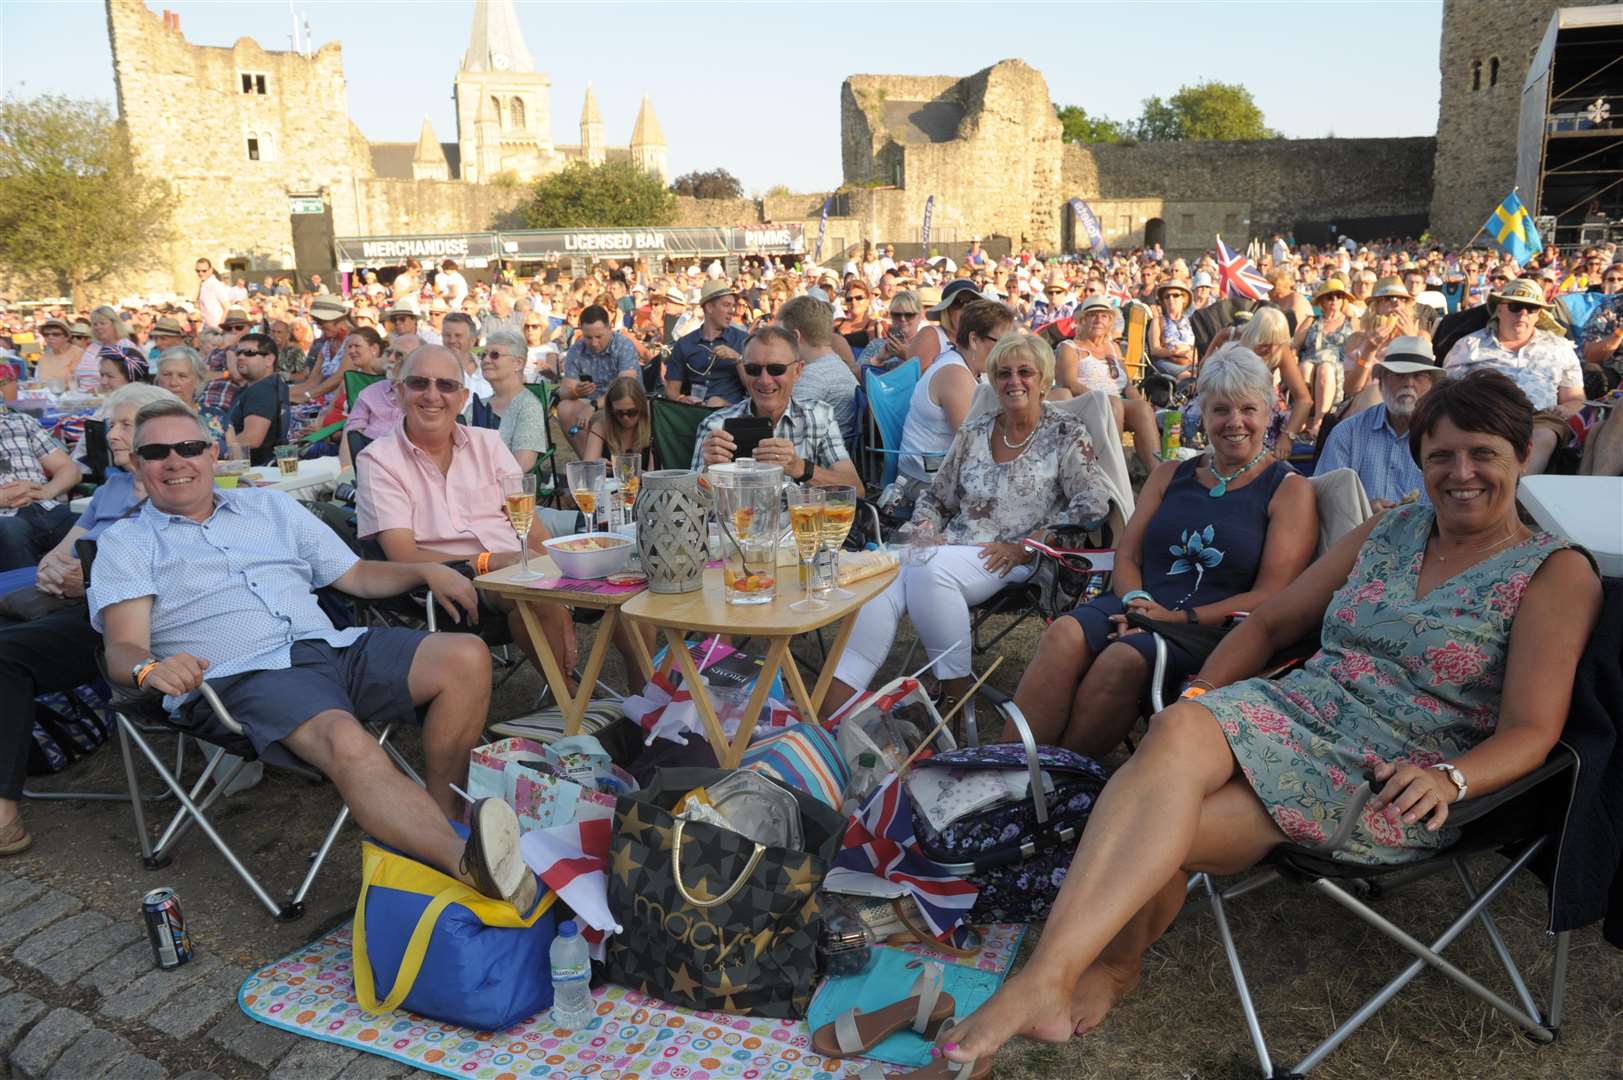 Revellers were allowed to drink during the Royal Philharmonic proms but not at other Castle Concerts shows. Picture: Steve Crispe